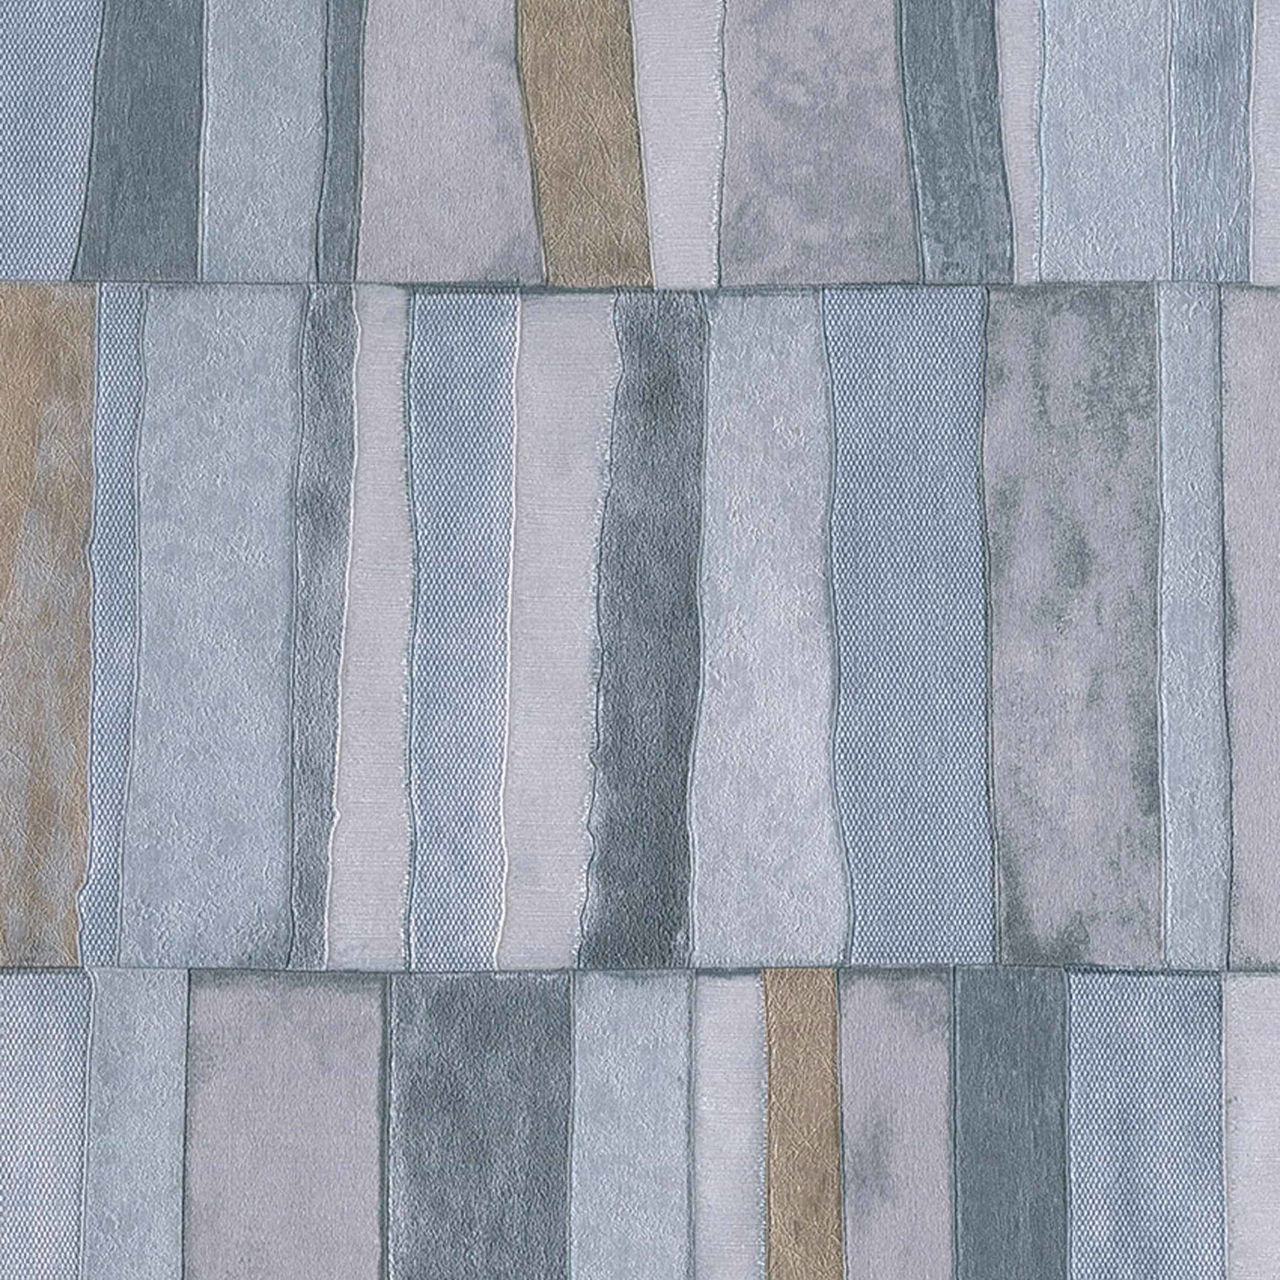 Picture of ΤΑΠΕΤΣΑΡΙΑ ΜΕ ΜΟΤΙΒΟ RITTER TILES - ΓΑΛΑΖΙΟ